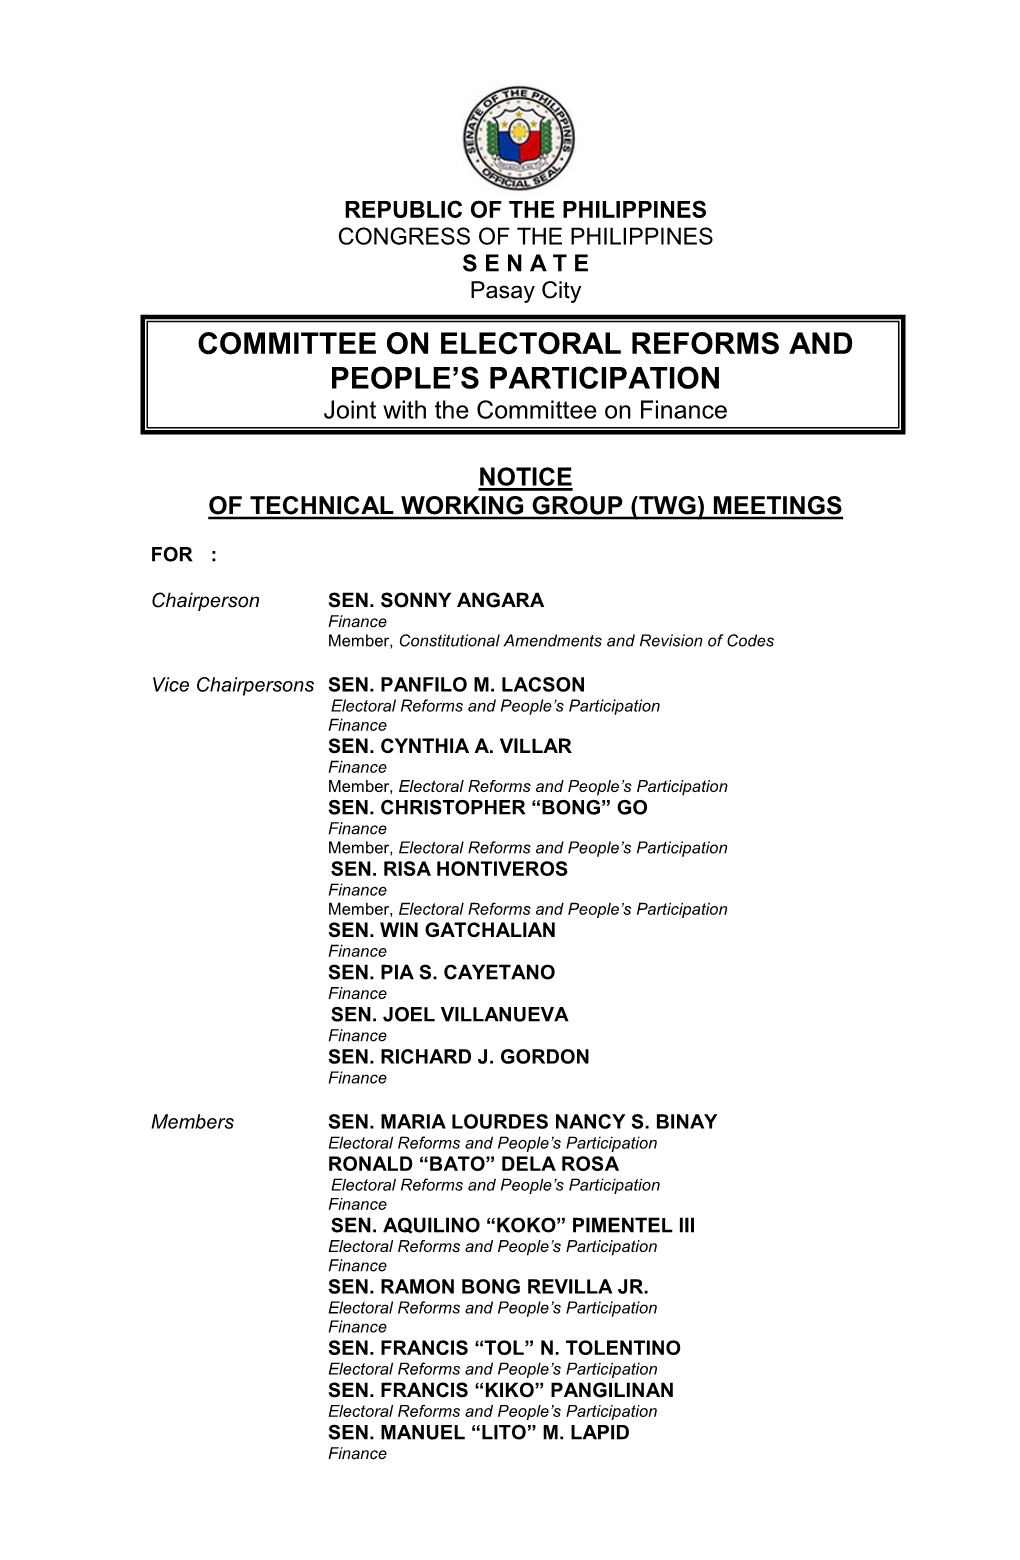 Committee on Electoral Reforms and People's